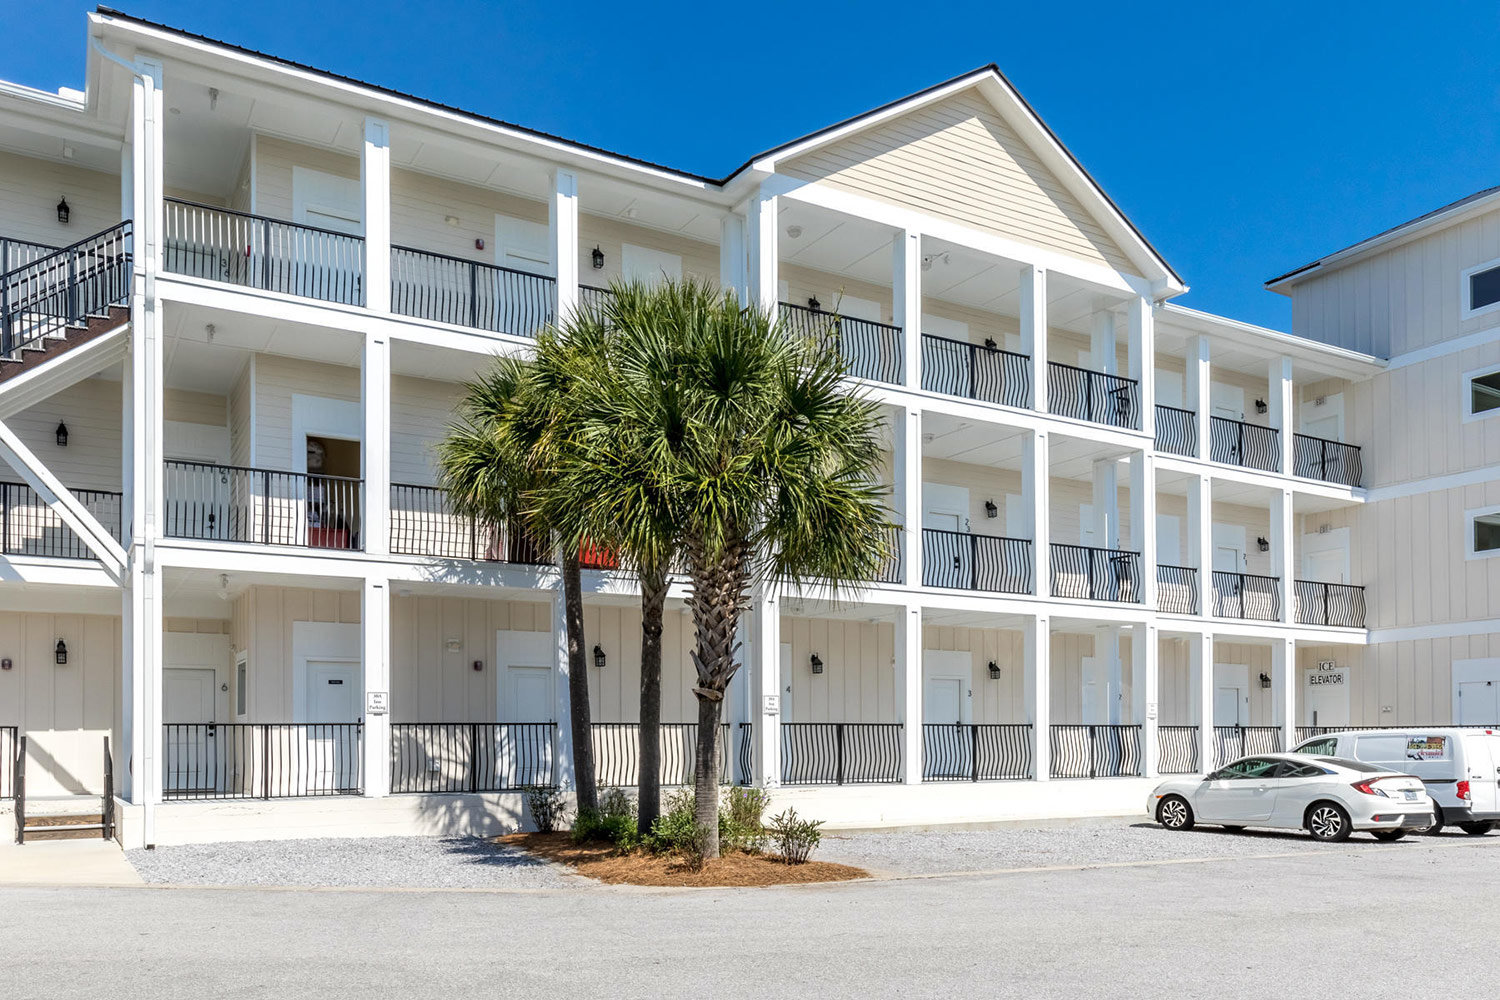 30A Hotel for Sale